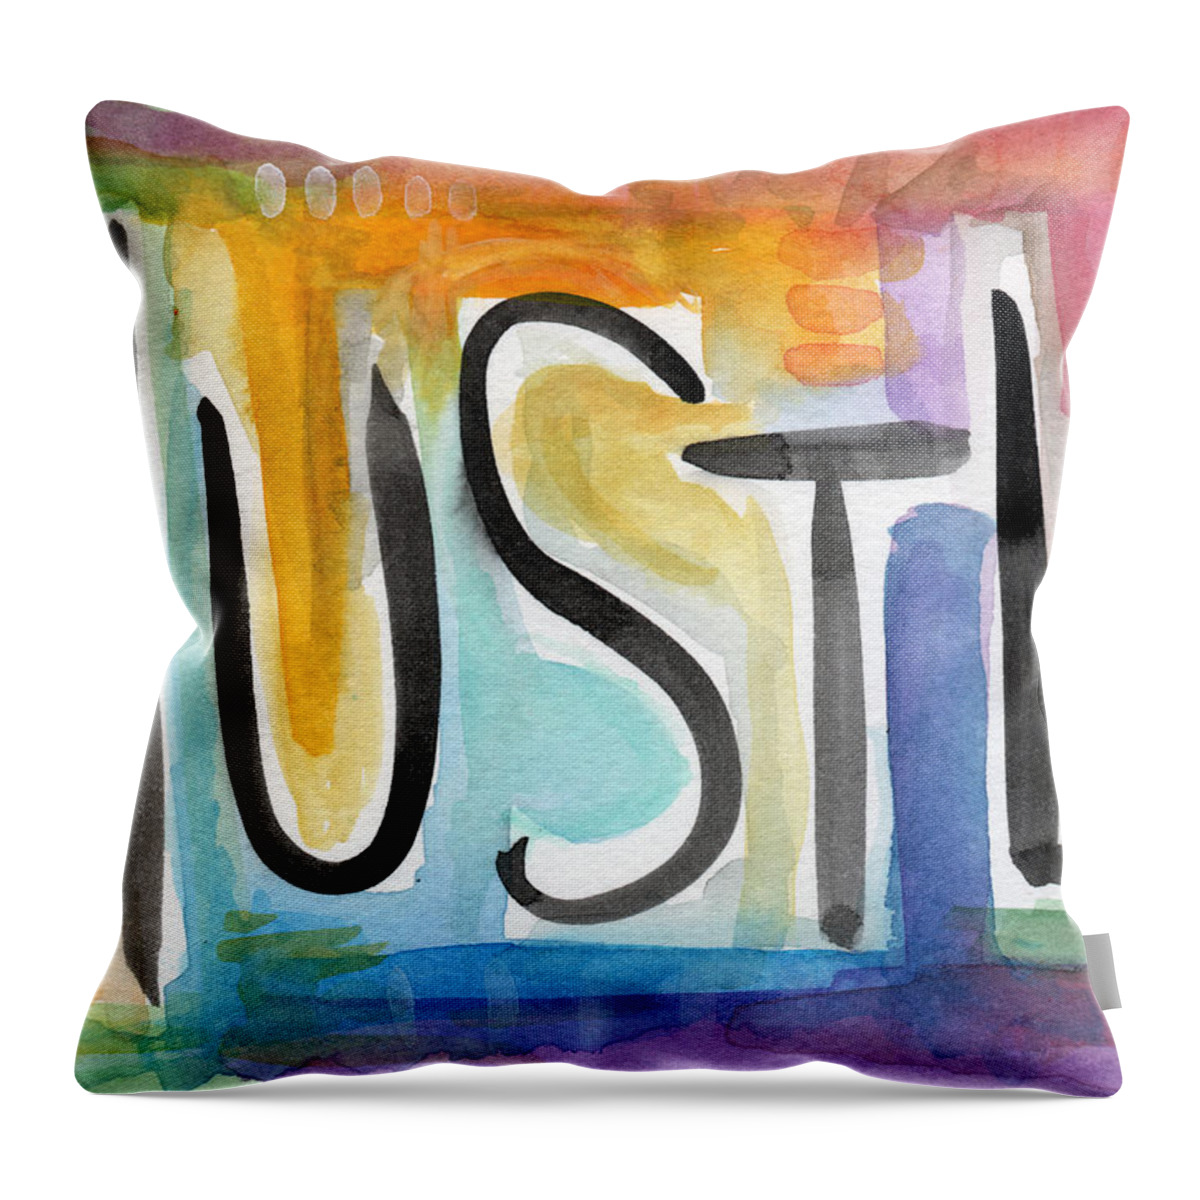 Hustle Throw Pillow featuring the painting Hustle- Art by Linda Woods by Linda Woods